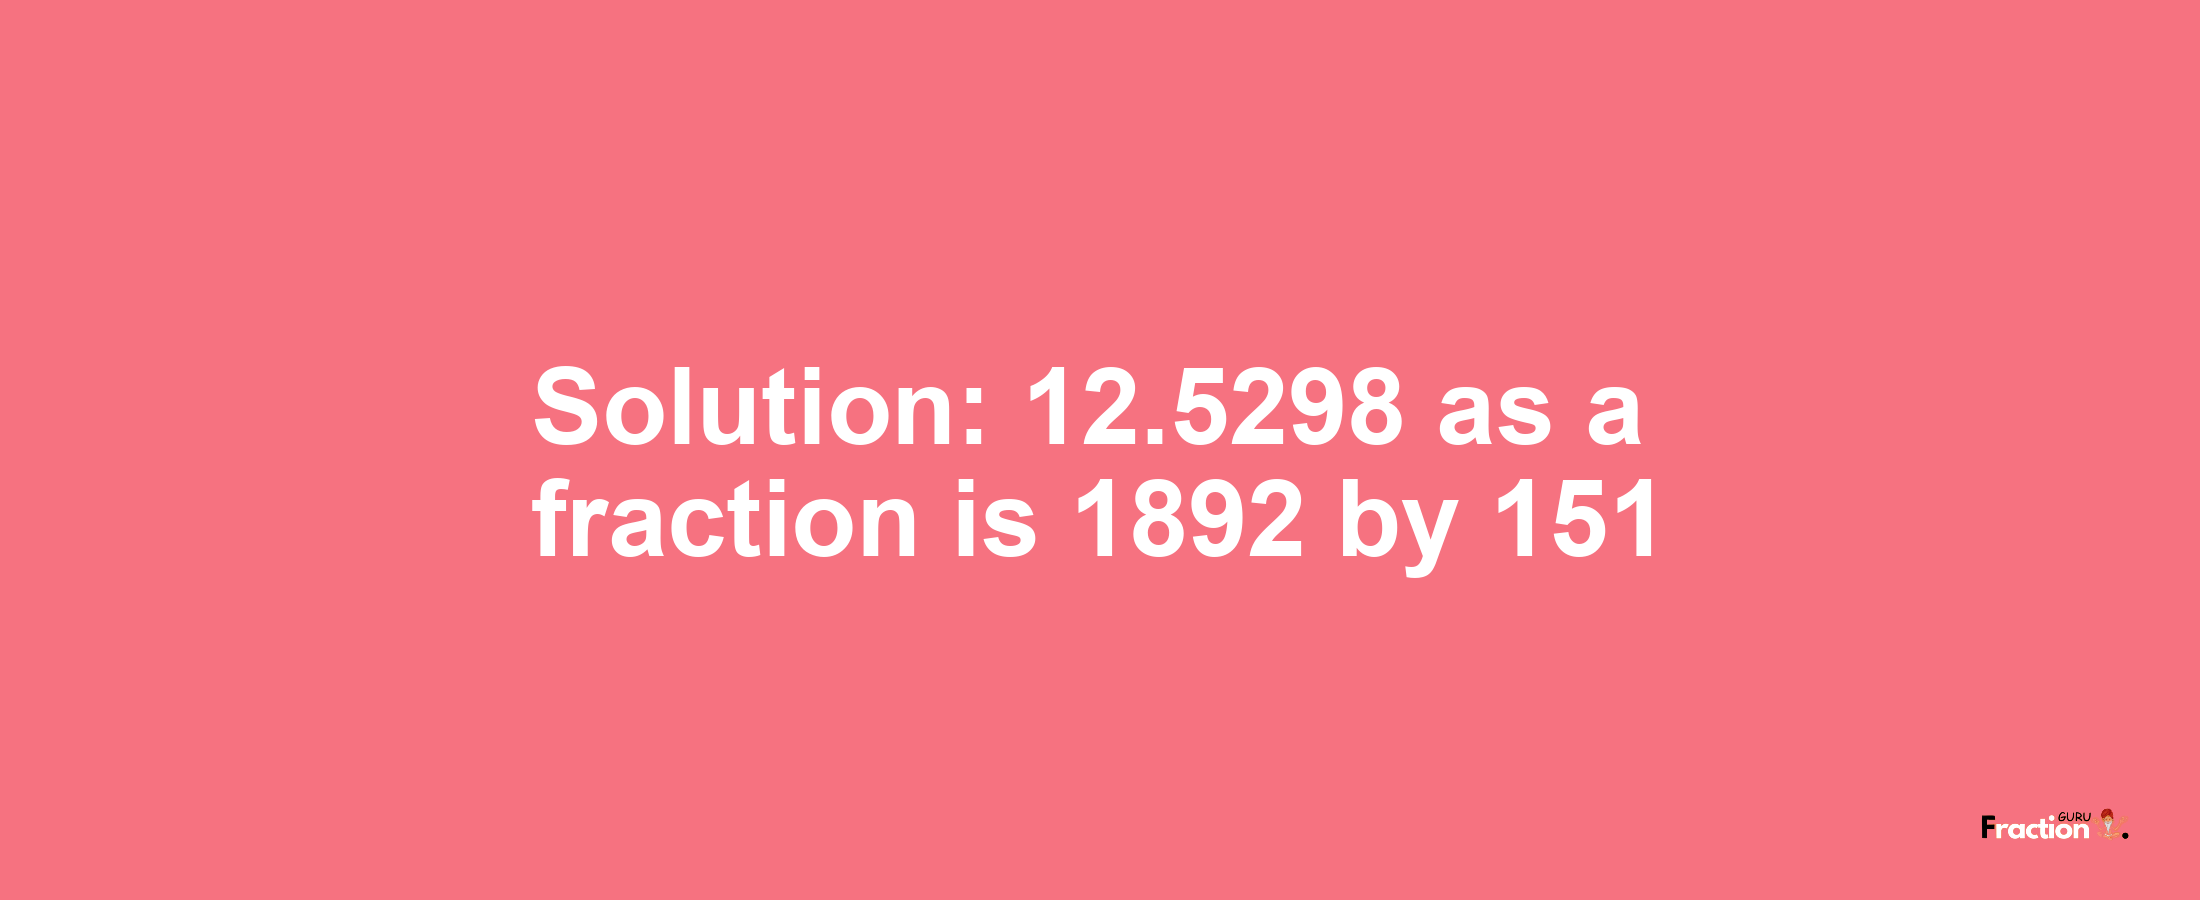 Solution:12.5298 as a fraction is 1892/151